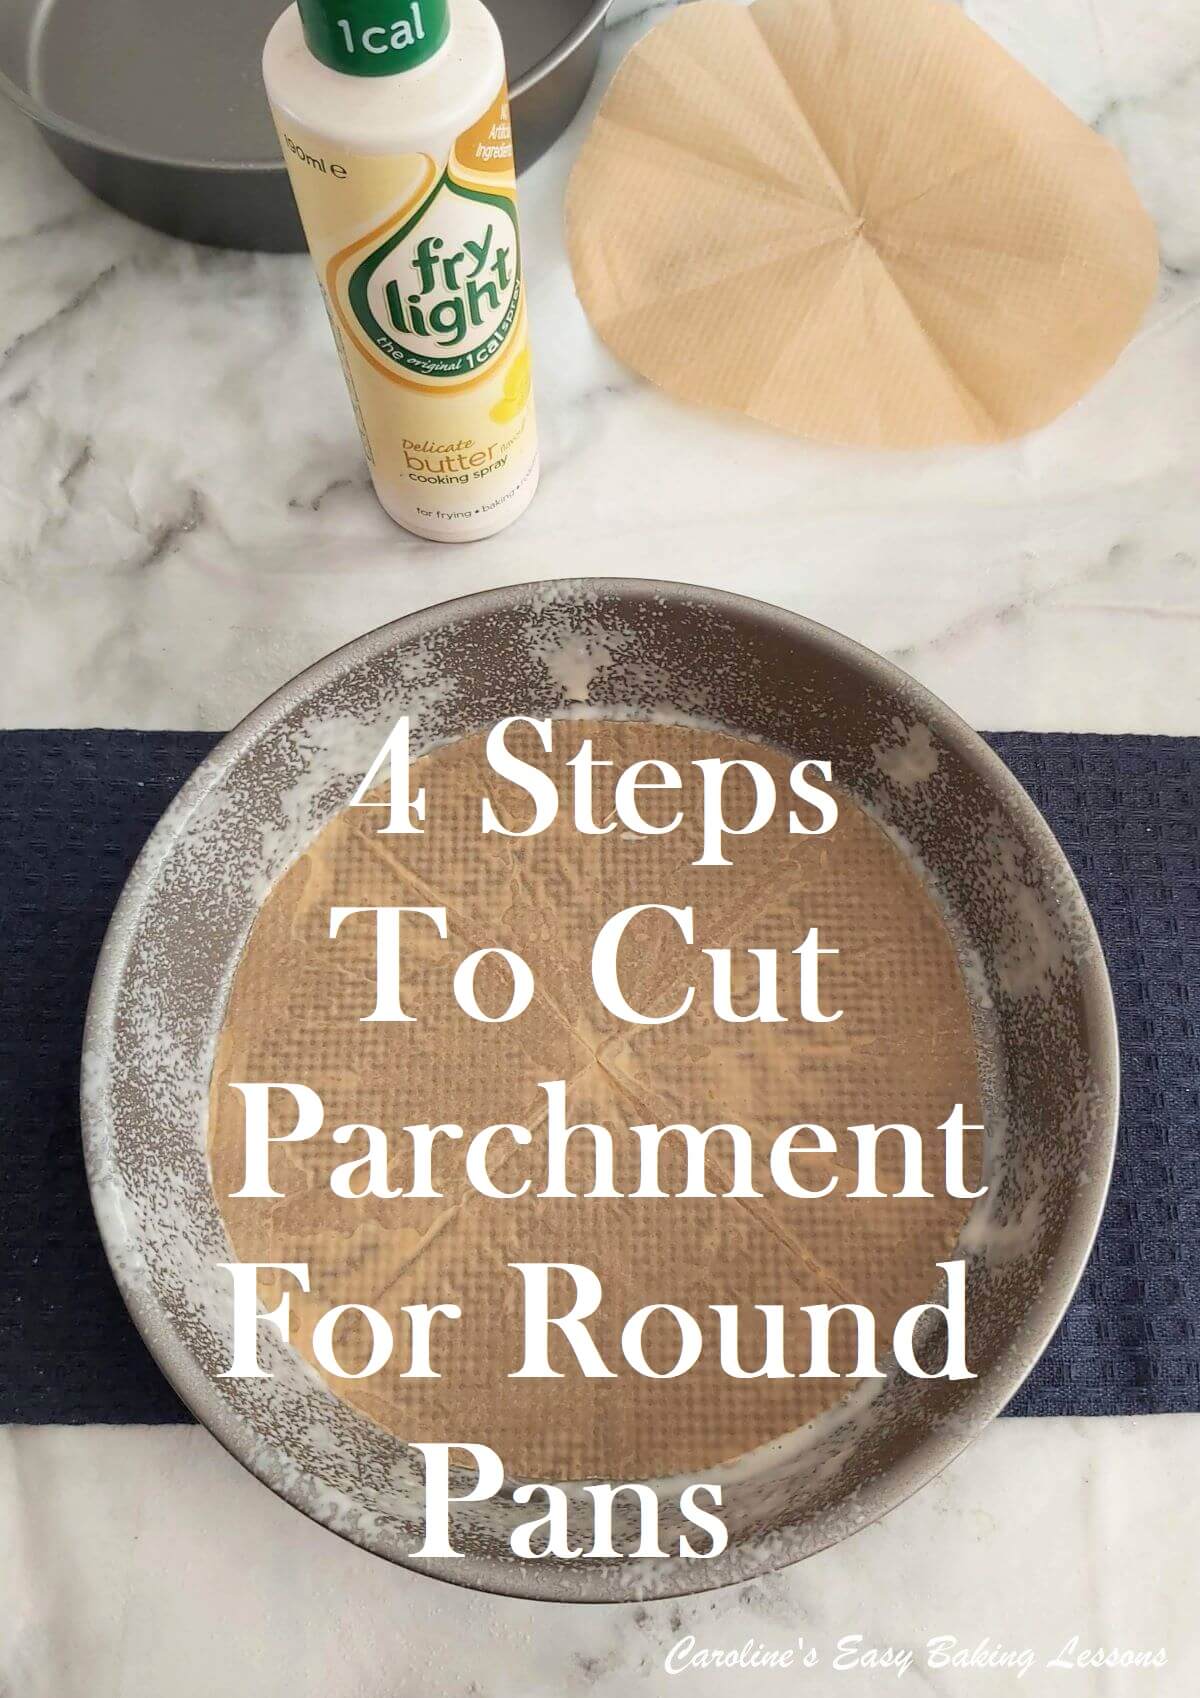 round cake pan, greased with Fry Light spray to the back and paper line with 4 steps to cut parchment for round pans title.